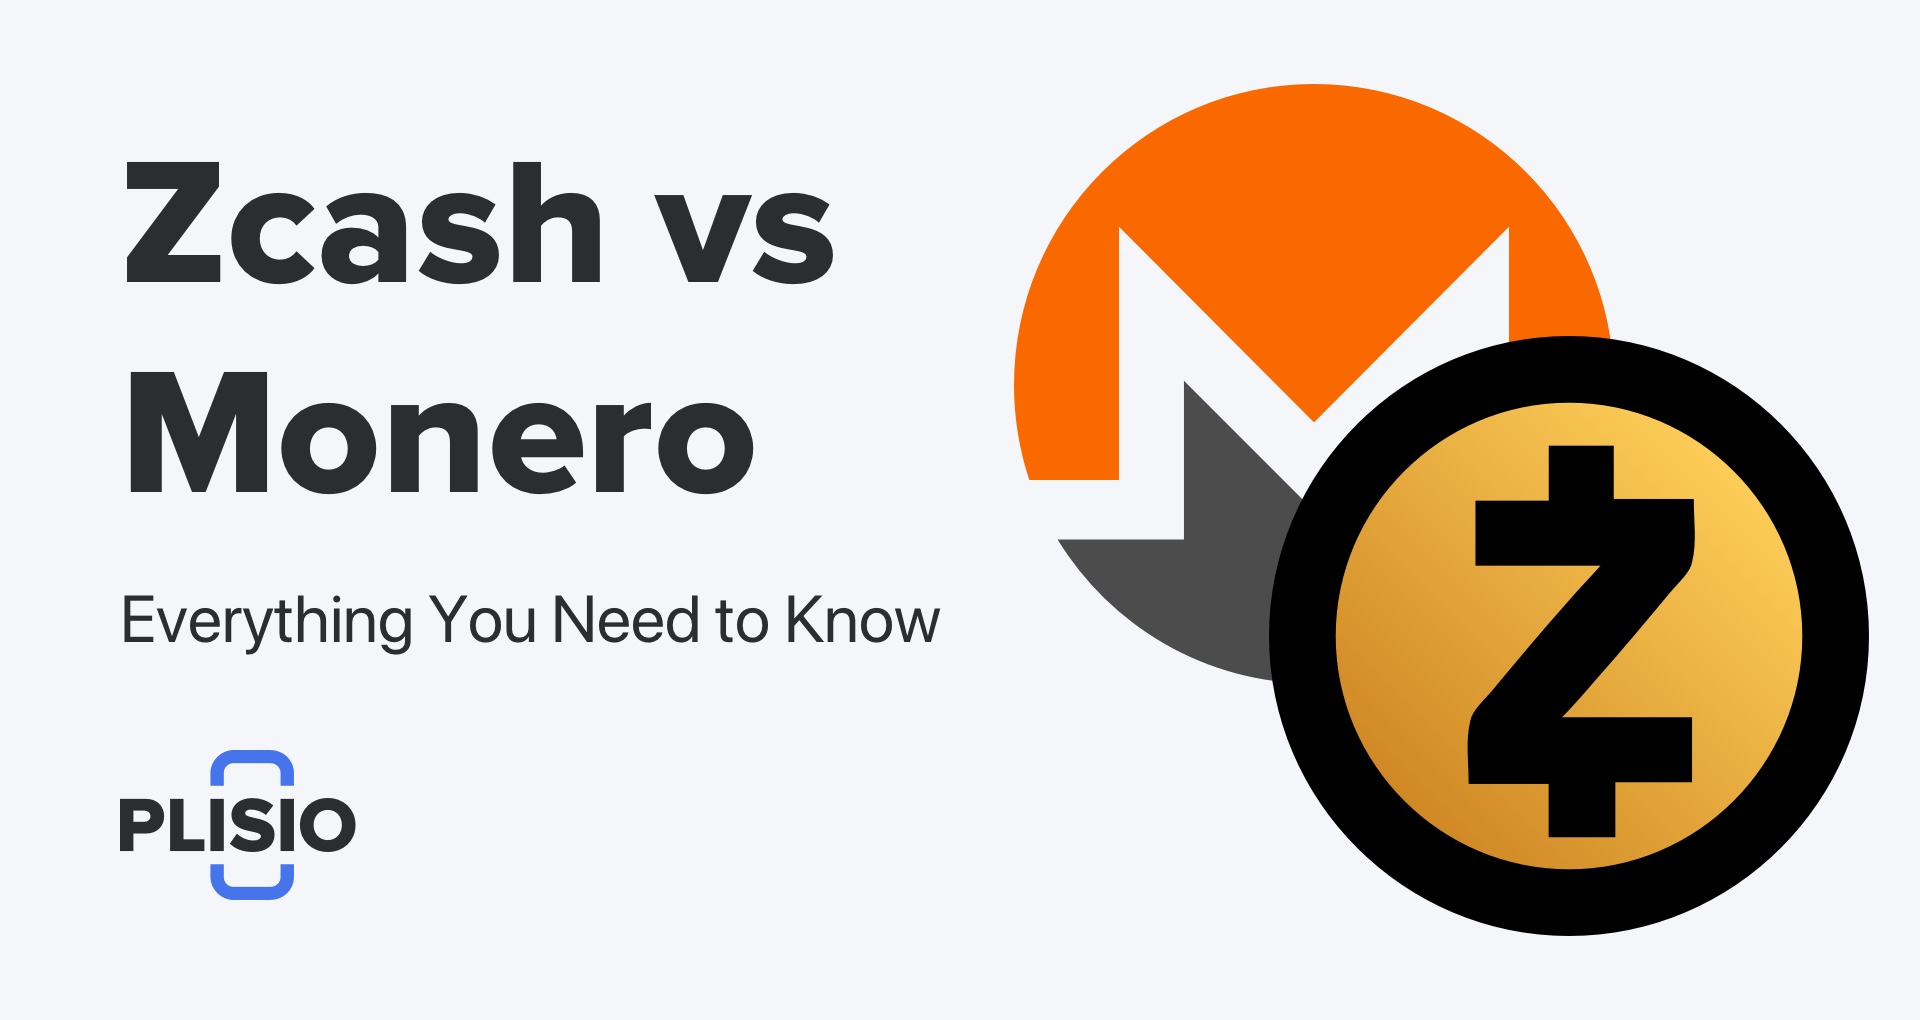 Zcash vs Monero and Dash: Which Is Better?